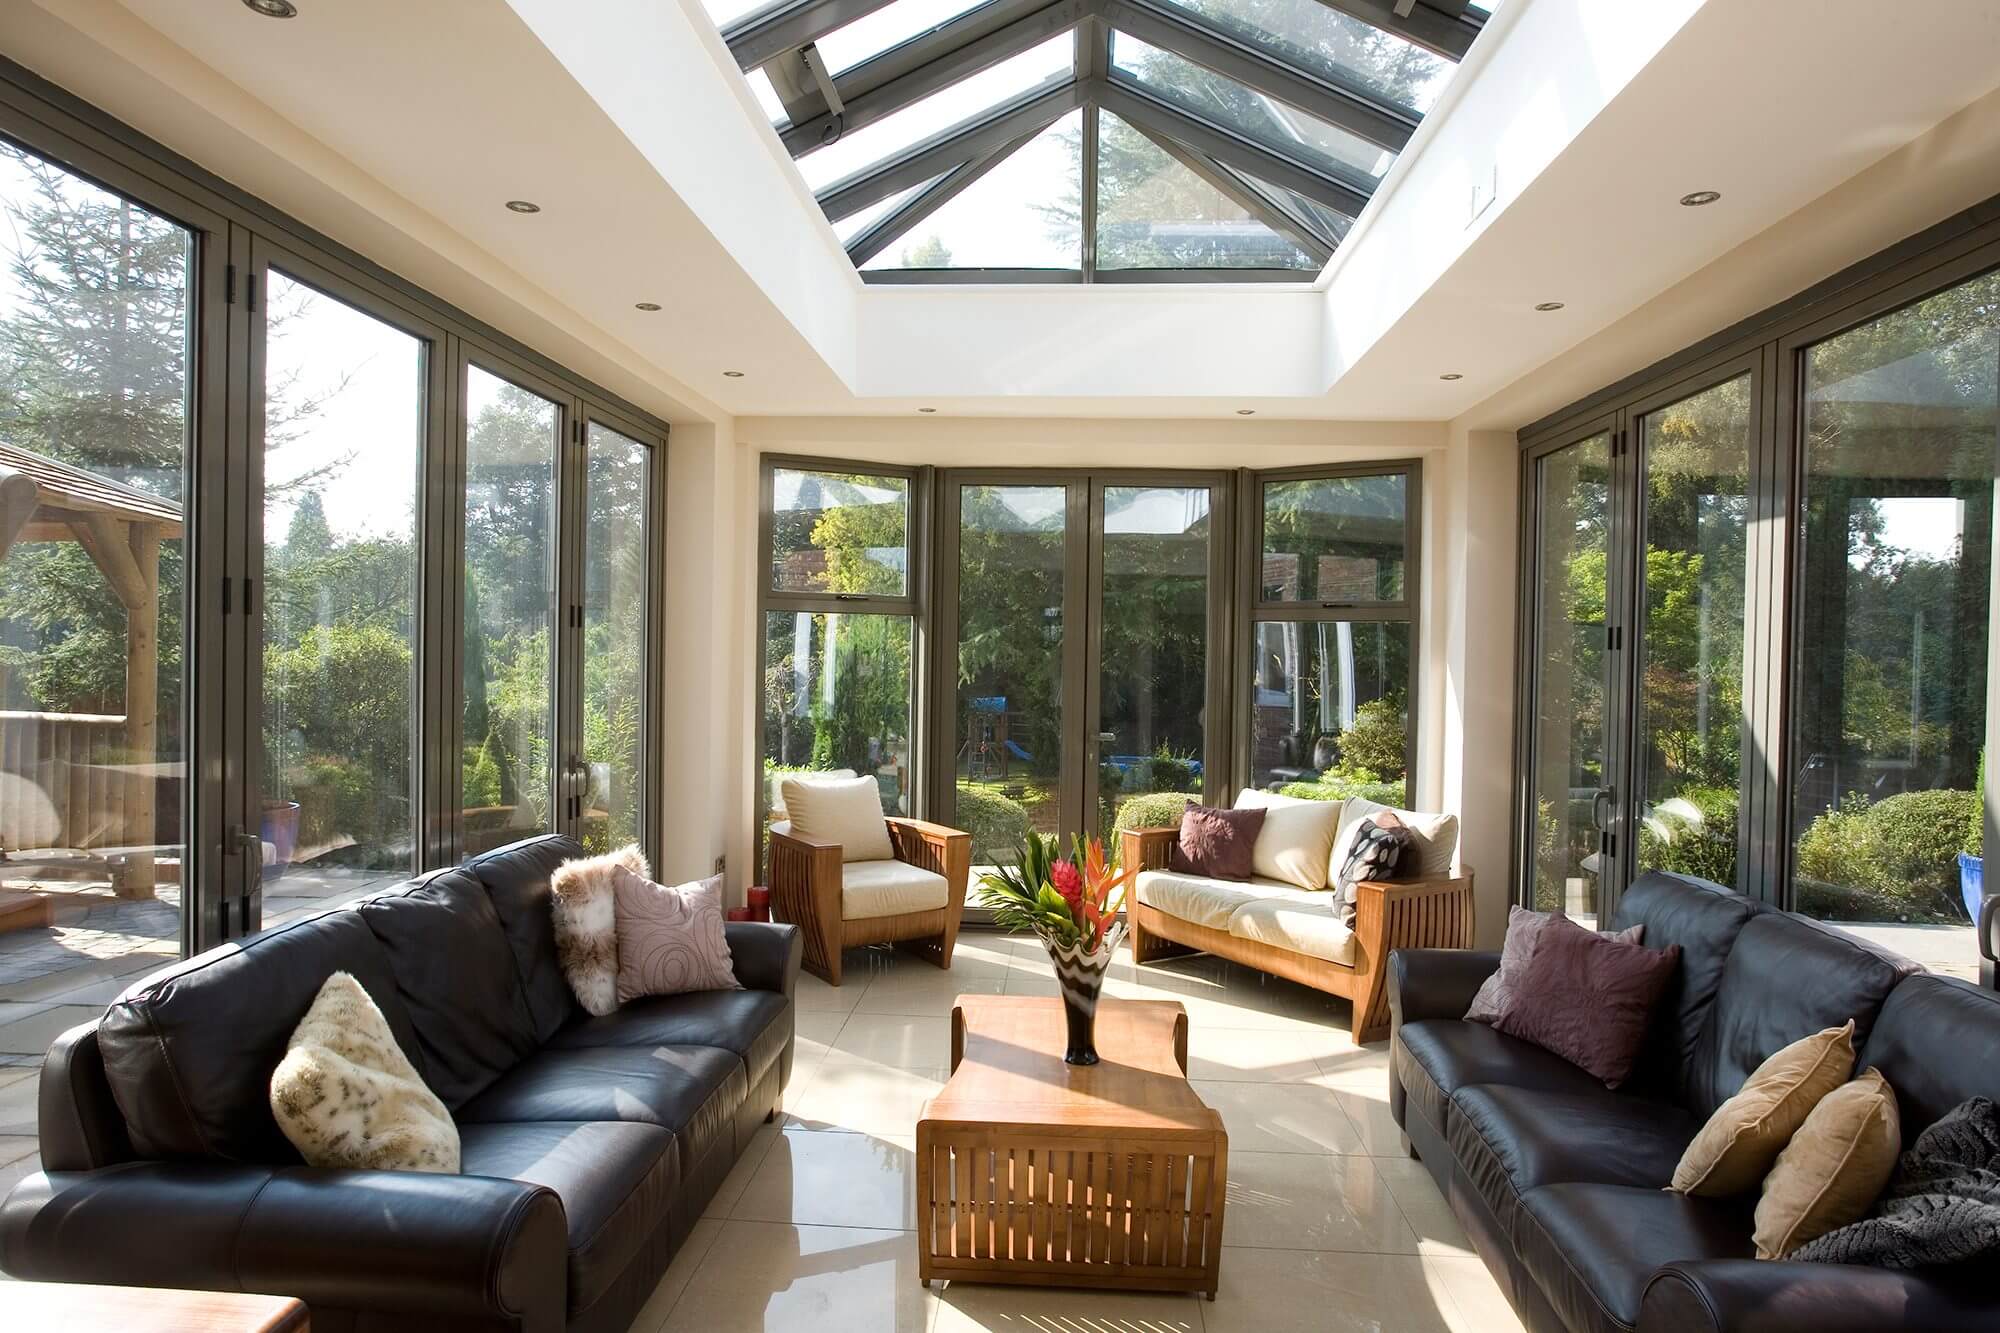 Bespoke orangery created by Apropos